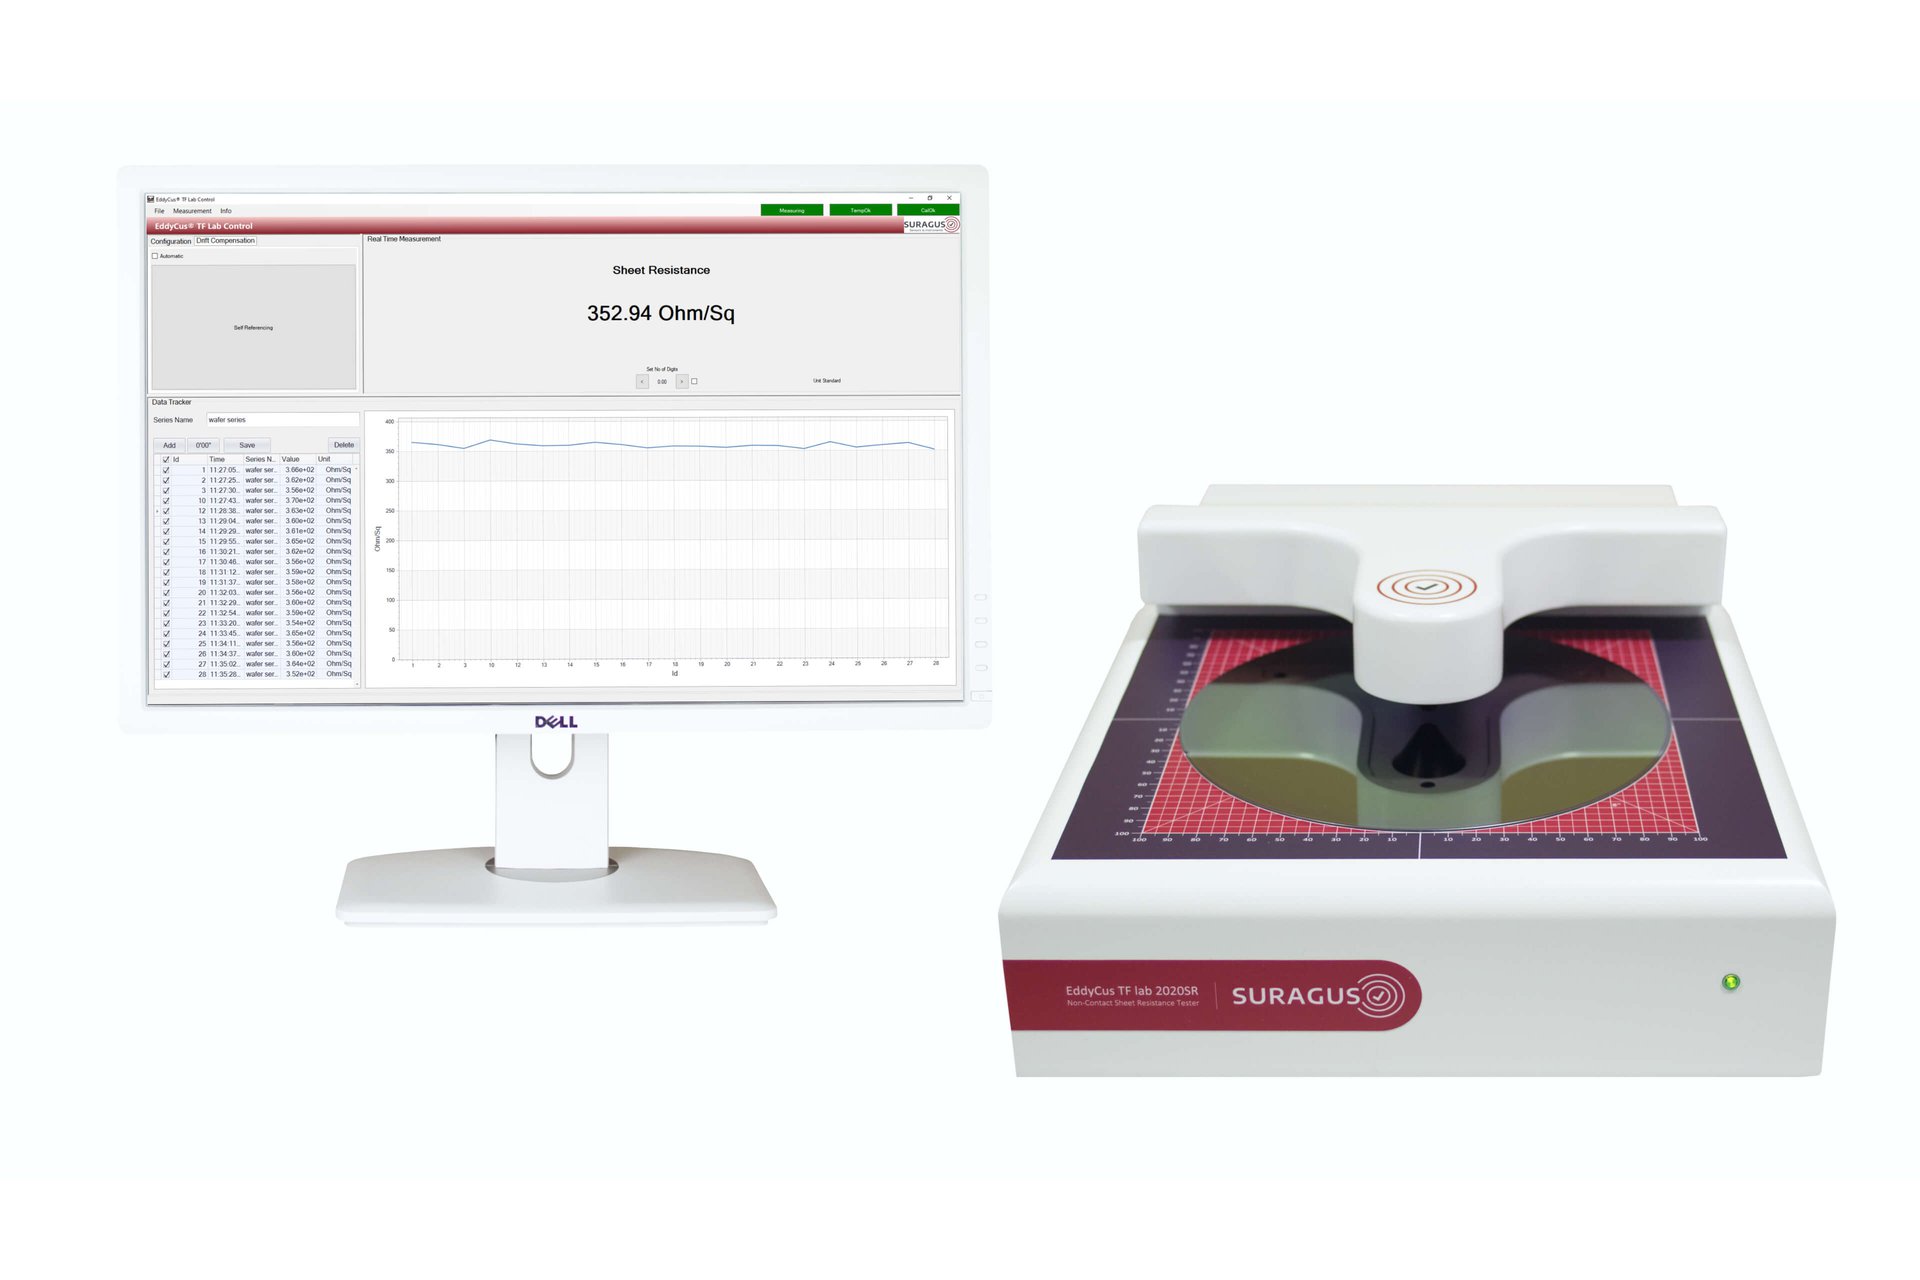 Sheet resistance measurement device EddyCus® TF lab 2020SR with wafer and software